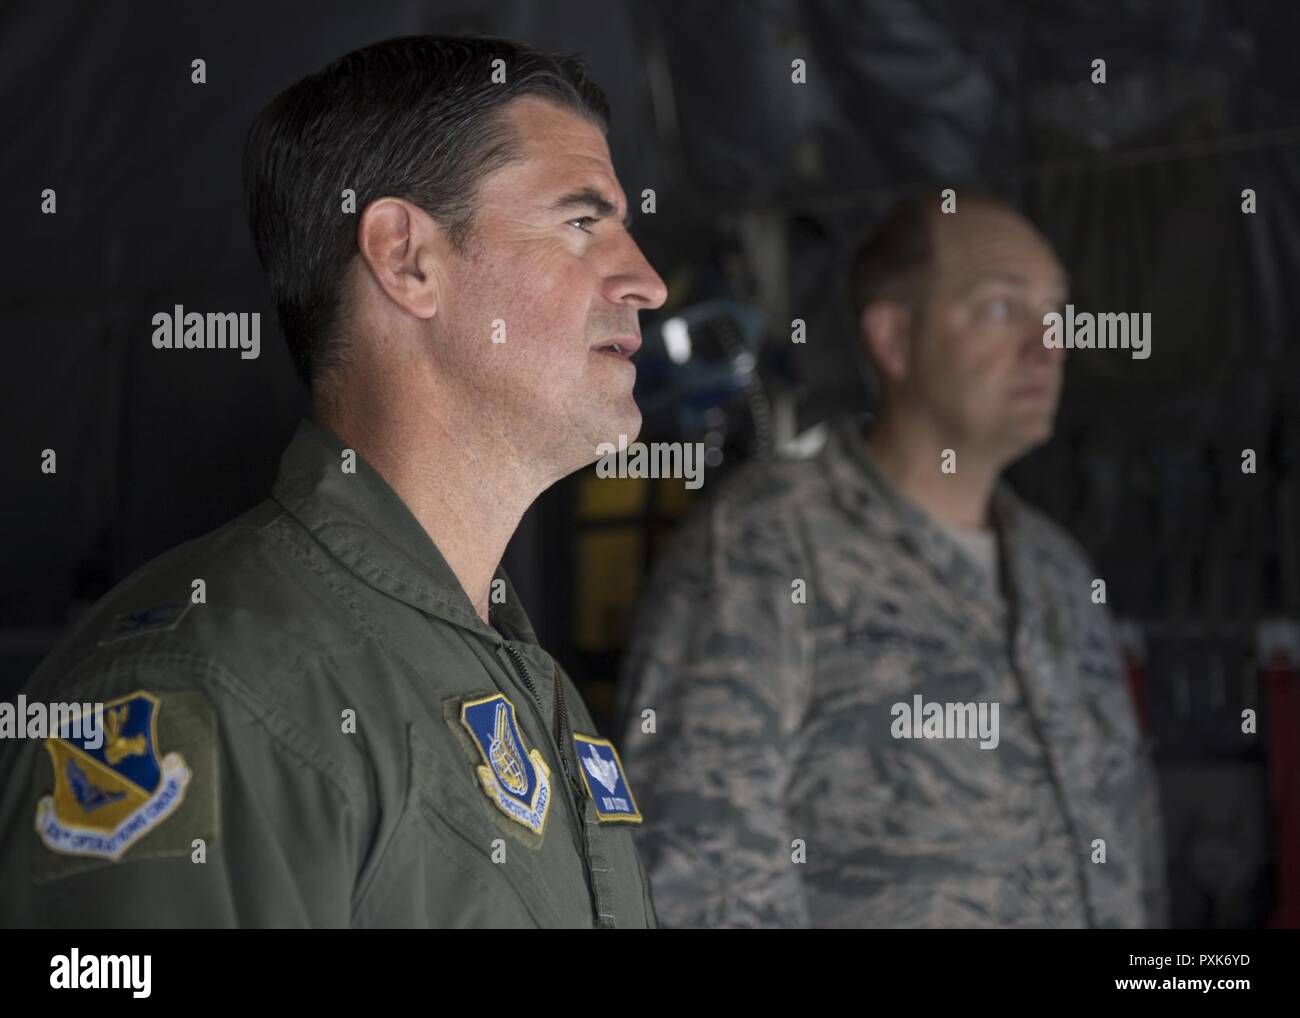 Col. Robert L. Dotson, 374th Operations commander, receives a briefing before his fine flight, June 2, 2017, at Yokota Air Base, Japan. Fini flights follow an Air Force tradition where aircrew members are met and hosed down with water by their group comrades. Stock Photo